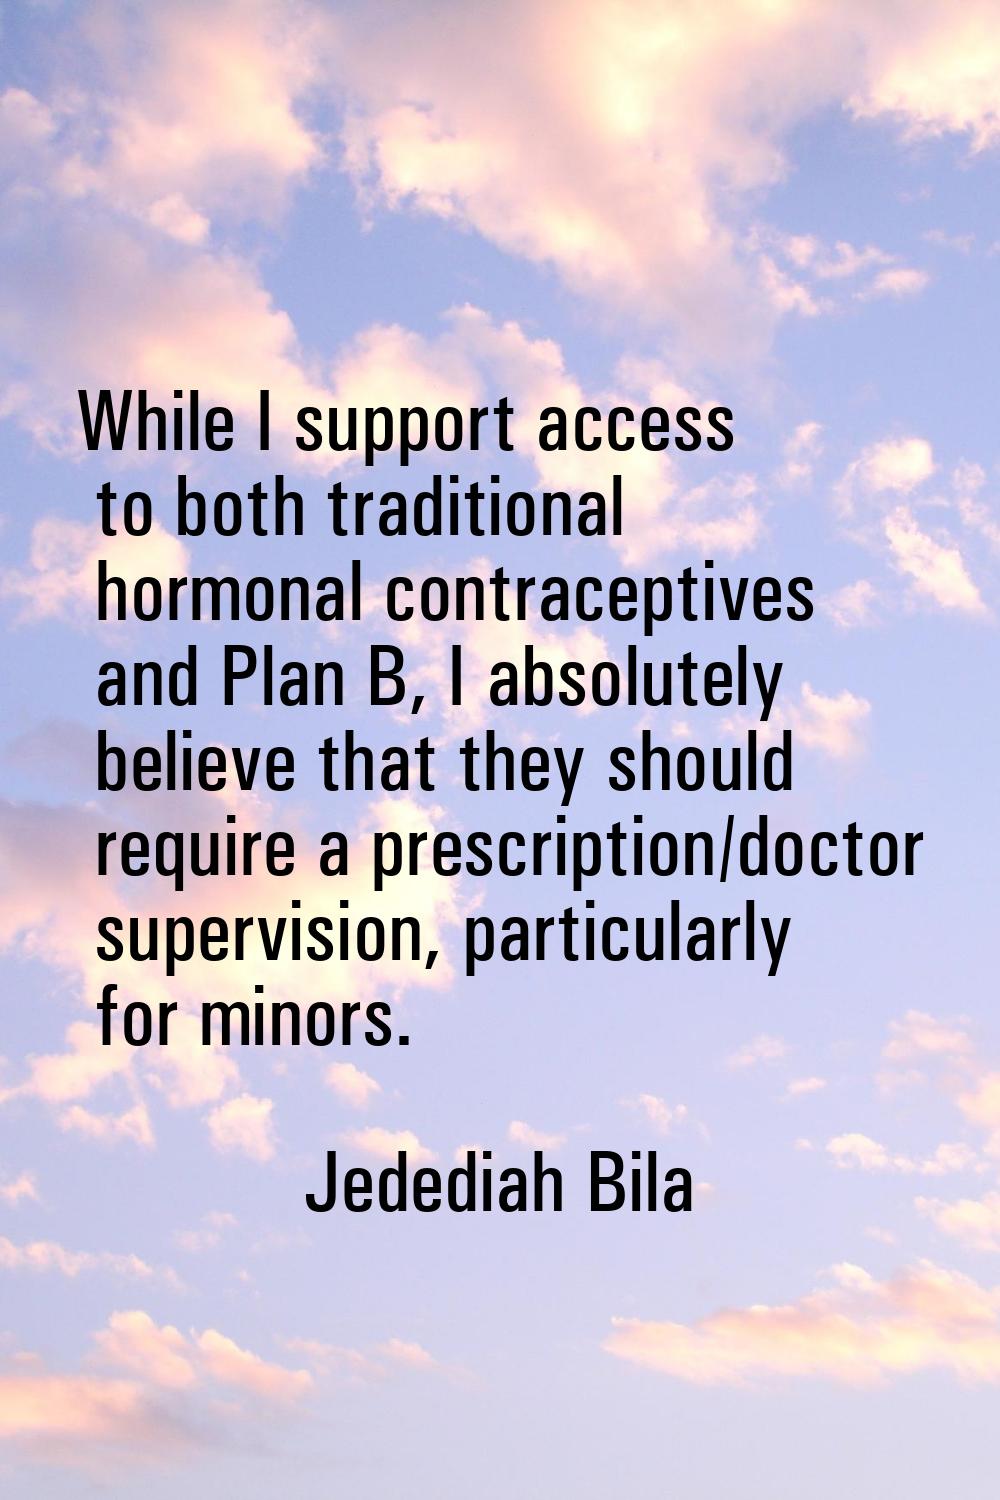 While I support access to both traditional hormonal contraceptives and Plan B, I absolutely believe